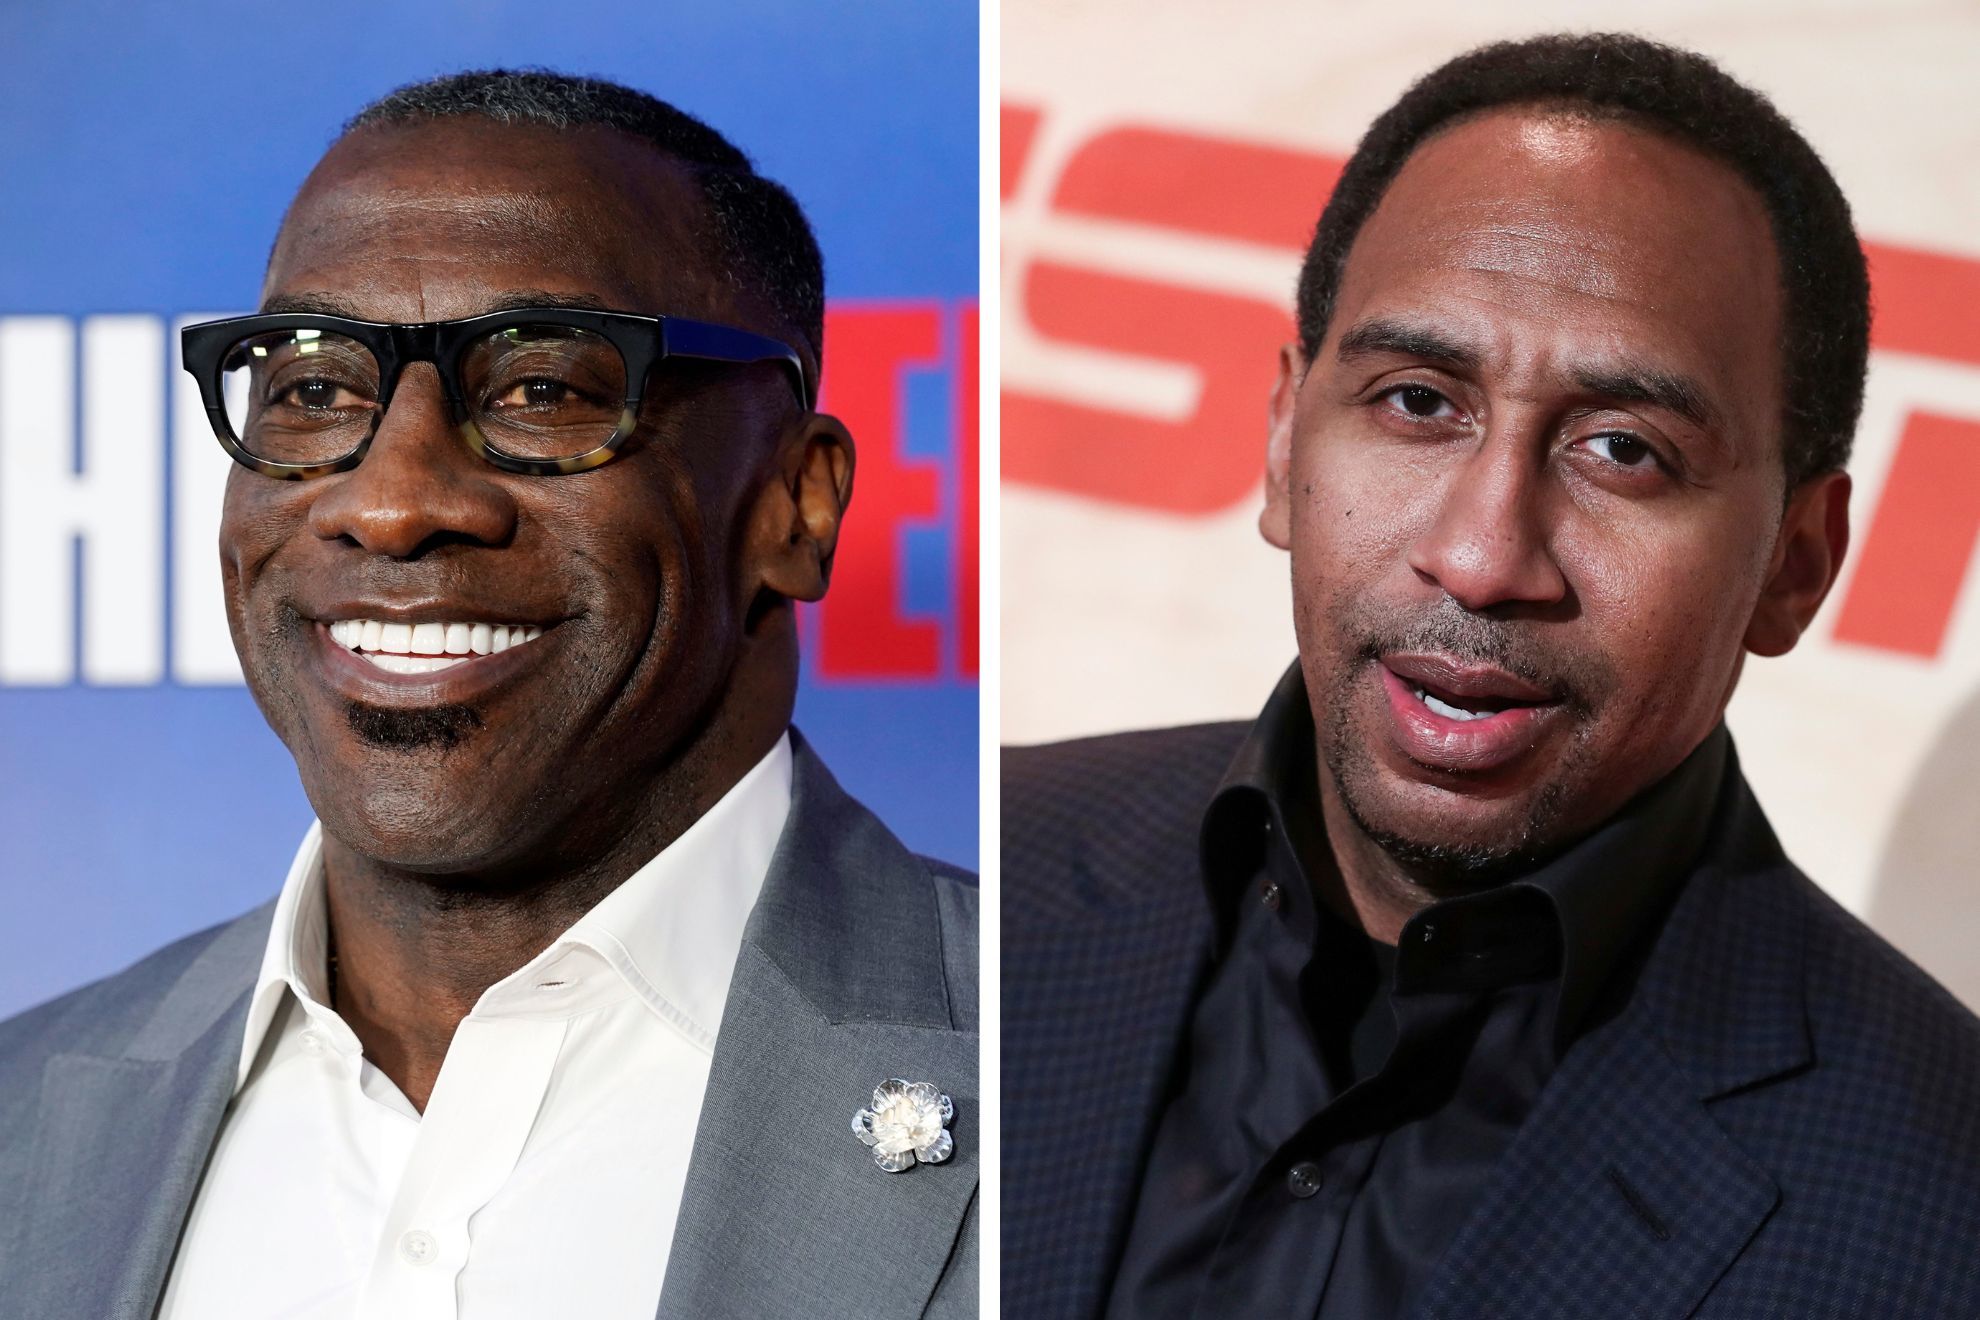 Shannon Sharpe to join First Take as new debate partner for Stephen A. Smith